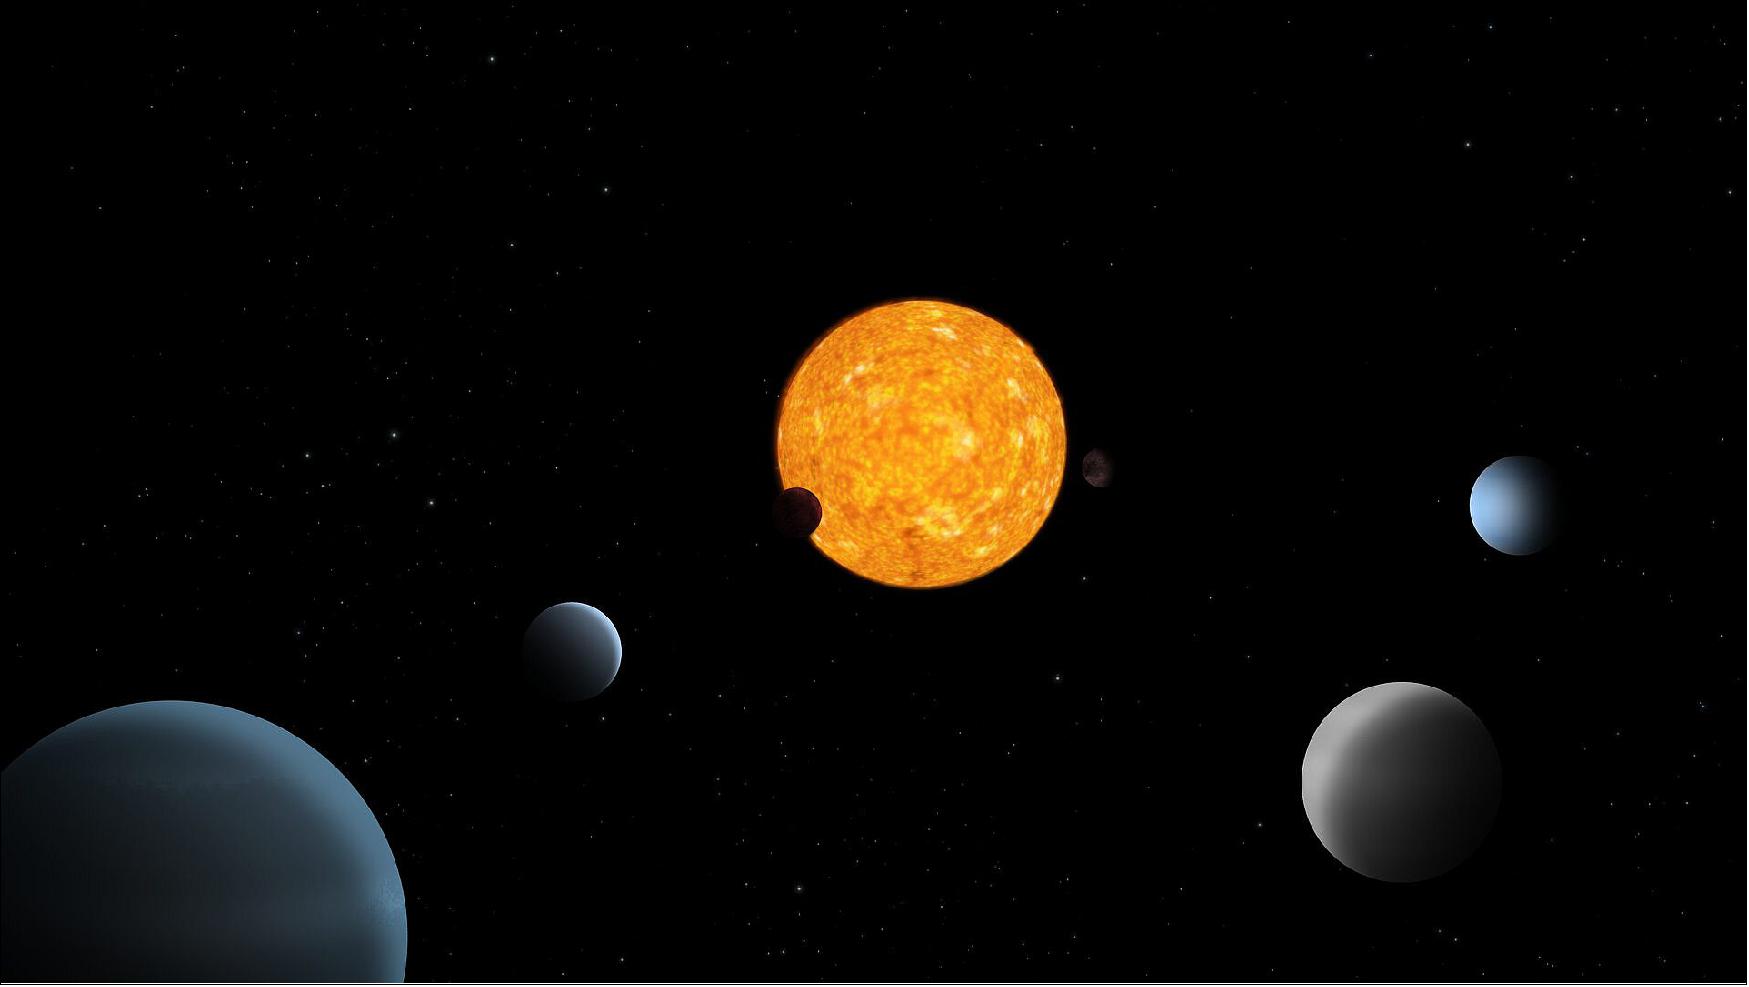 Figure 21: This is an artist’s impression of the TOI-178 planetary system, which was revealed by ESA’s exoplanet watcher Cheops. The system consists of six exoplanets, five of which are locked in a rare rhythmic dance as they orbit their central star. The two inner planets have terrestrial densities (like Earth) and the outer four planets are gaseous (with densities like Neptune and Jupiter). The five outer planets follow a rhythmic dance as they move in their orbits. This phenomenon is called orbital resonance, and it means that there are patterns that repeat themselves as the planets go around the star, with some planets aligning every few orbits. In this artist impression, the relative sizes of the planets are to scale, but not the distances and the size of the star (image credit: ESA)